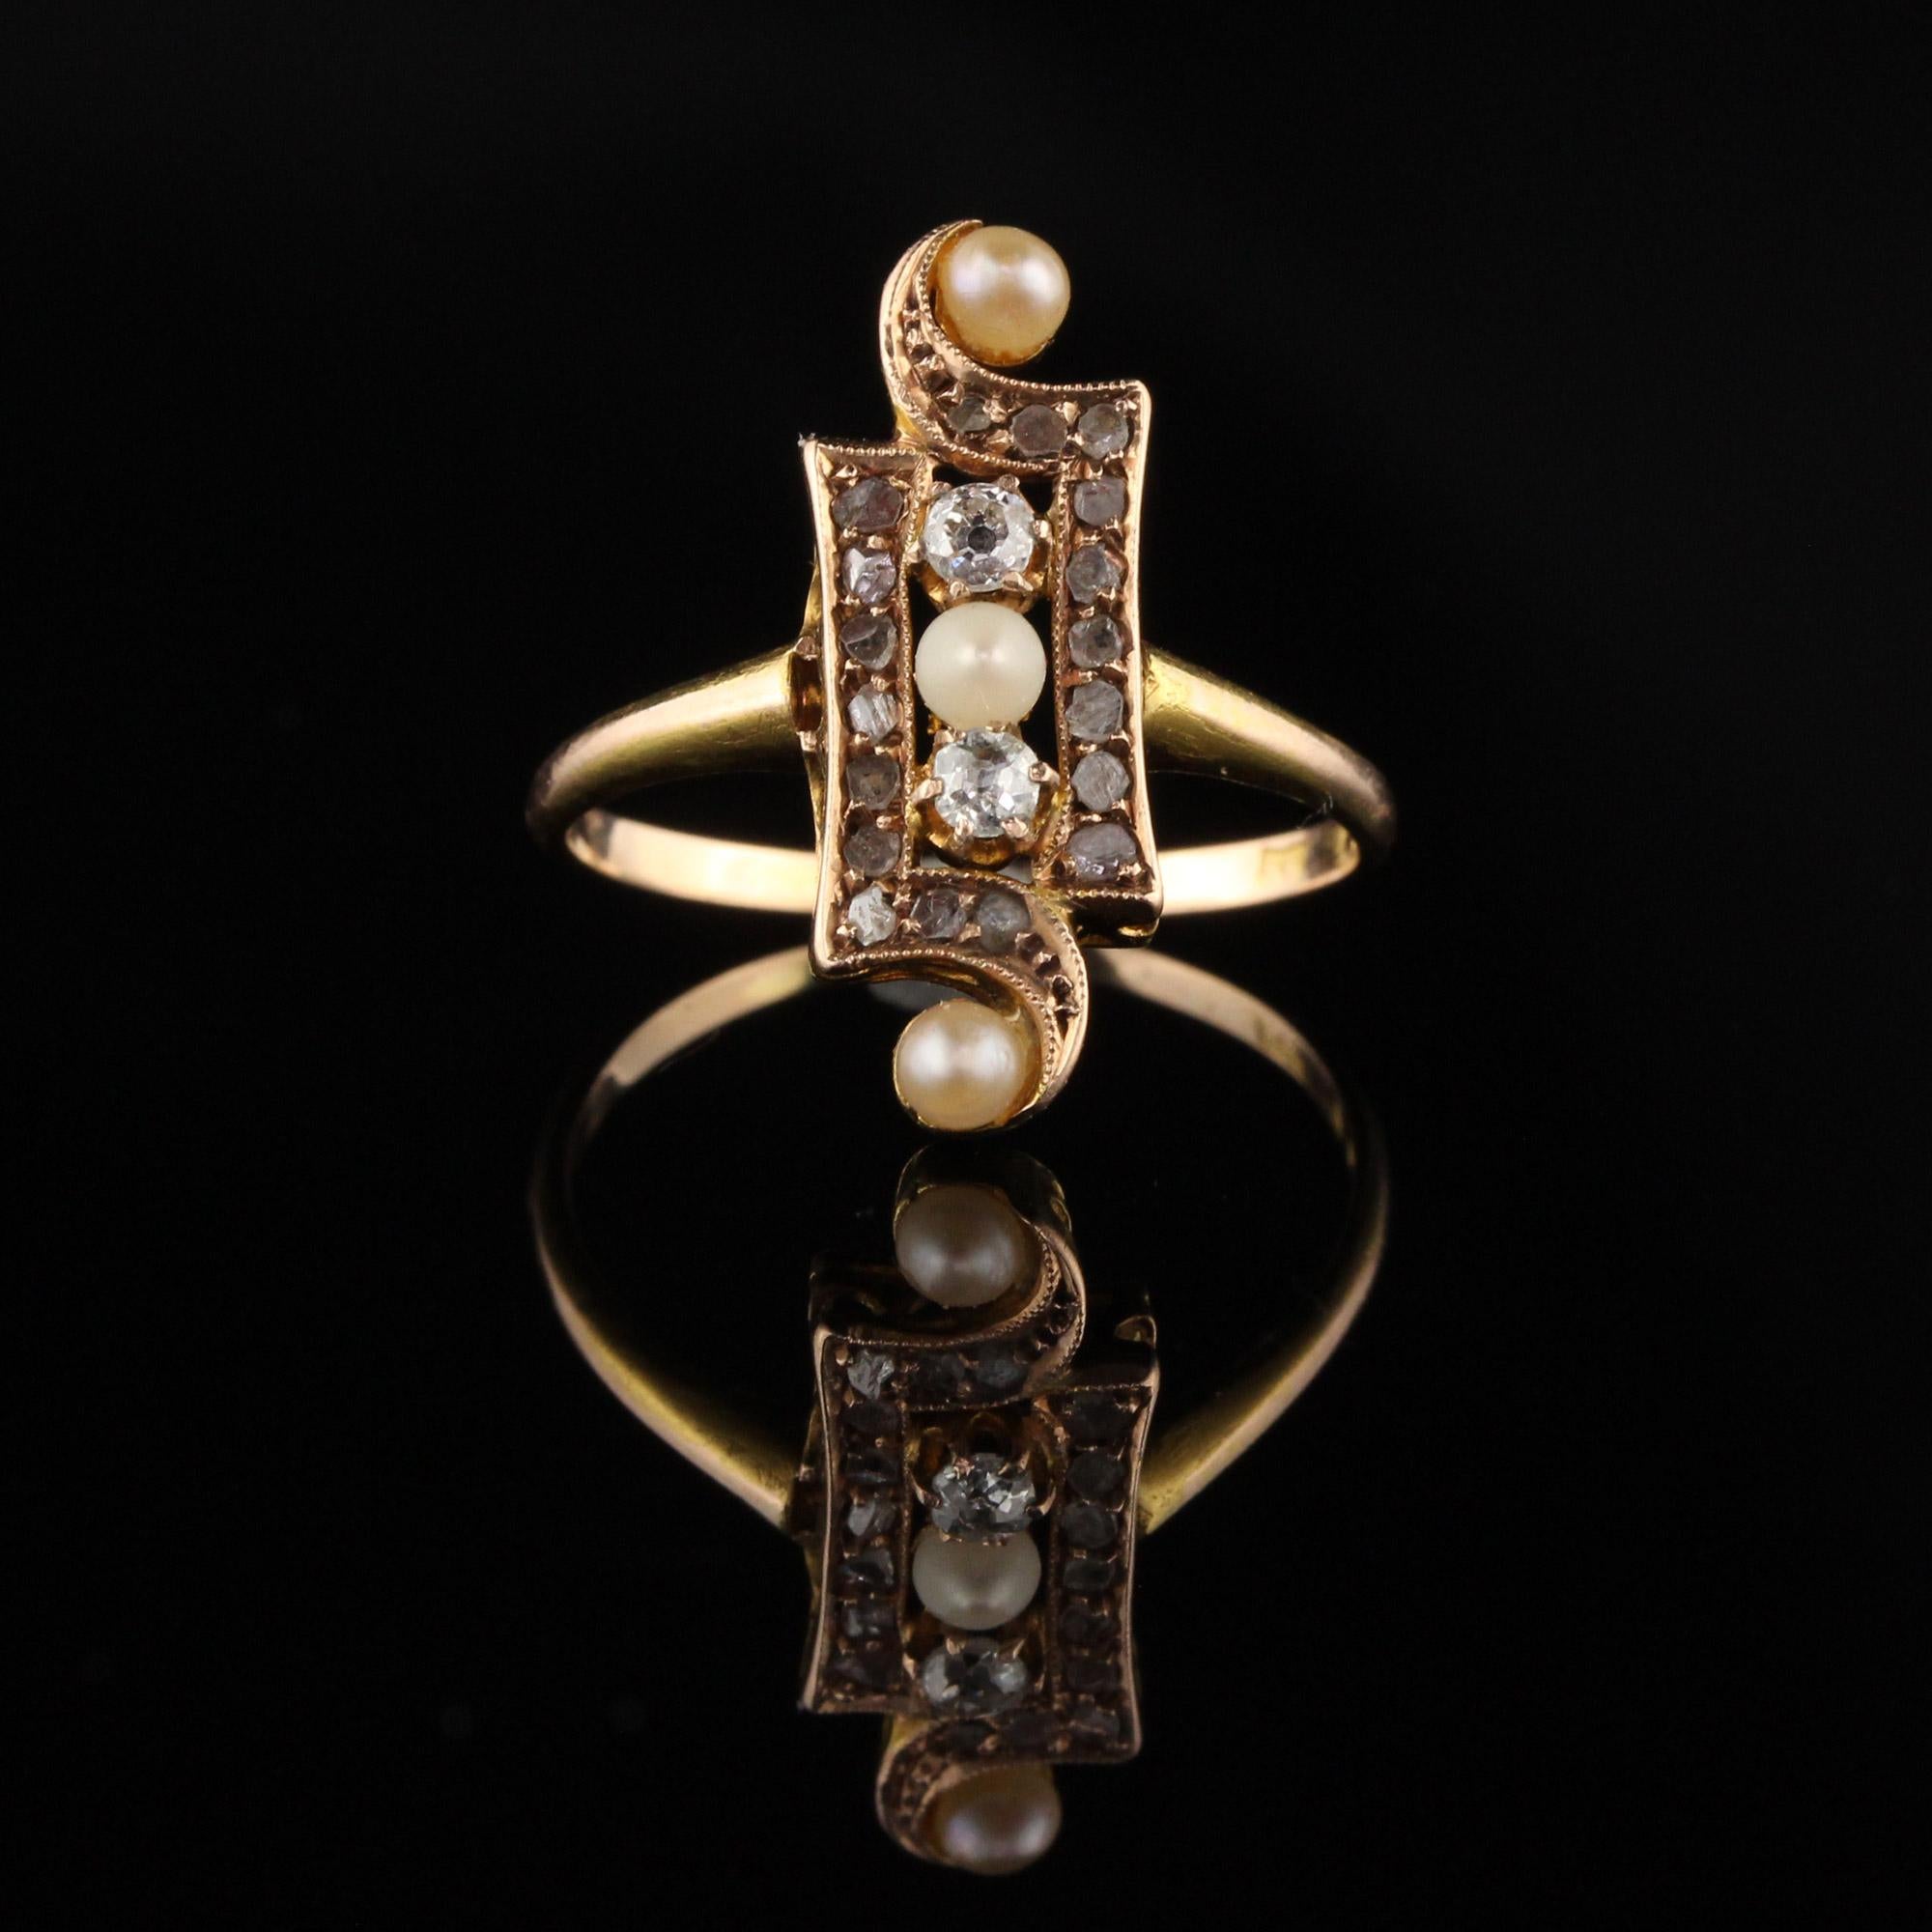 Antique Victorian 18 Karat Yellow Gold Pearl and Rose Cut Diamond Ring In Good Condition For Sale In Great Neck, NY